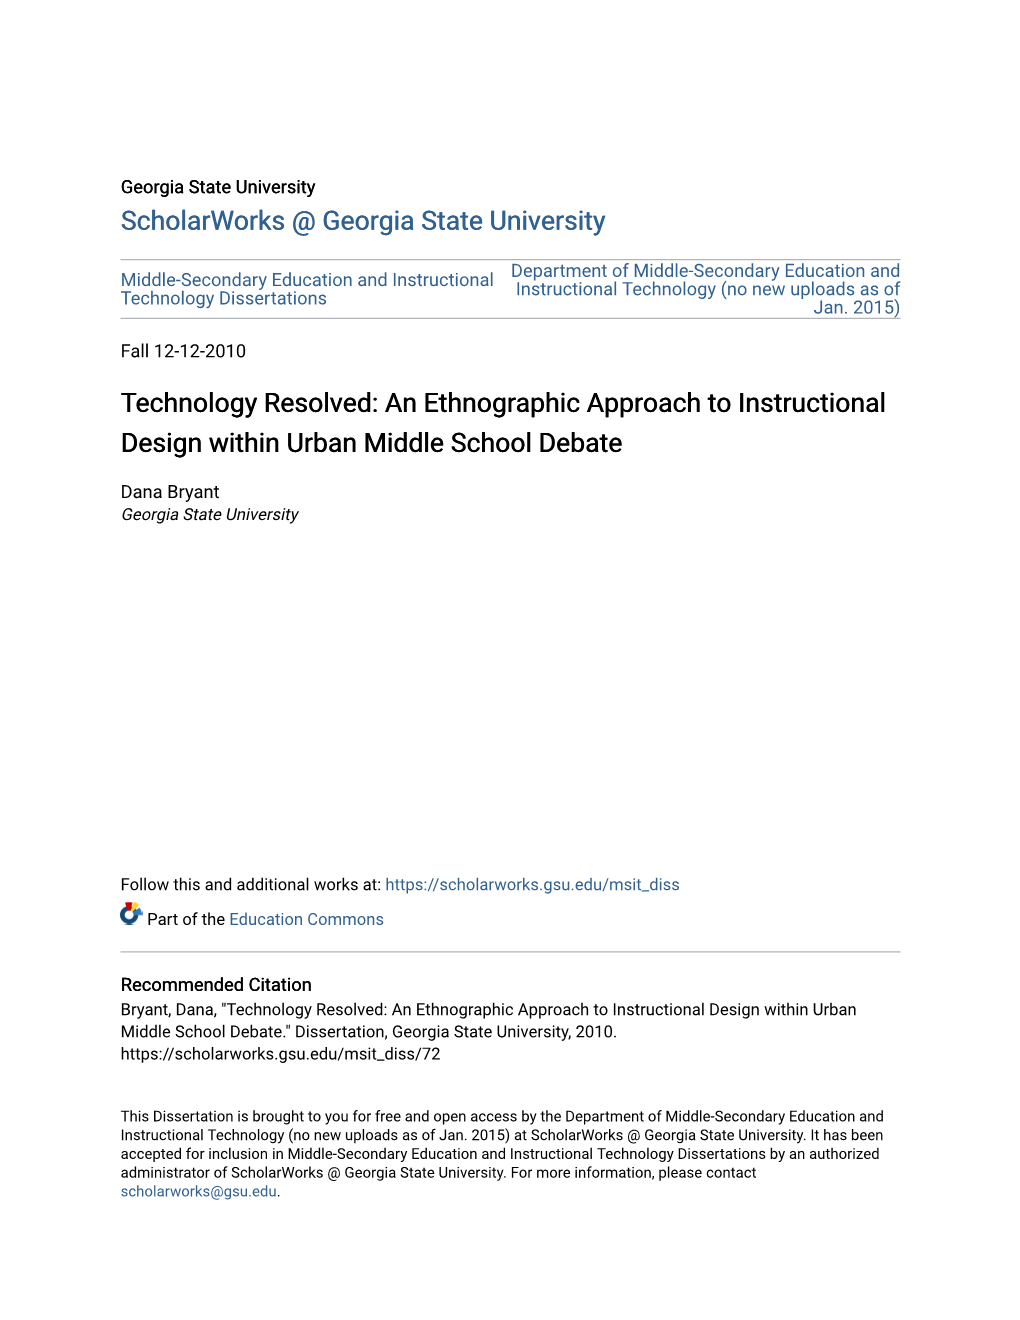 An Ethnographic Approach to Instructional Design Within Urban Middle School Debate